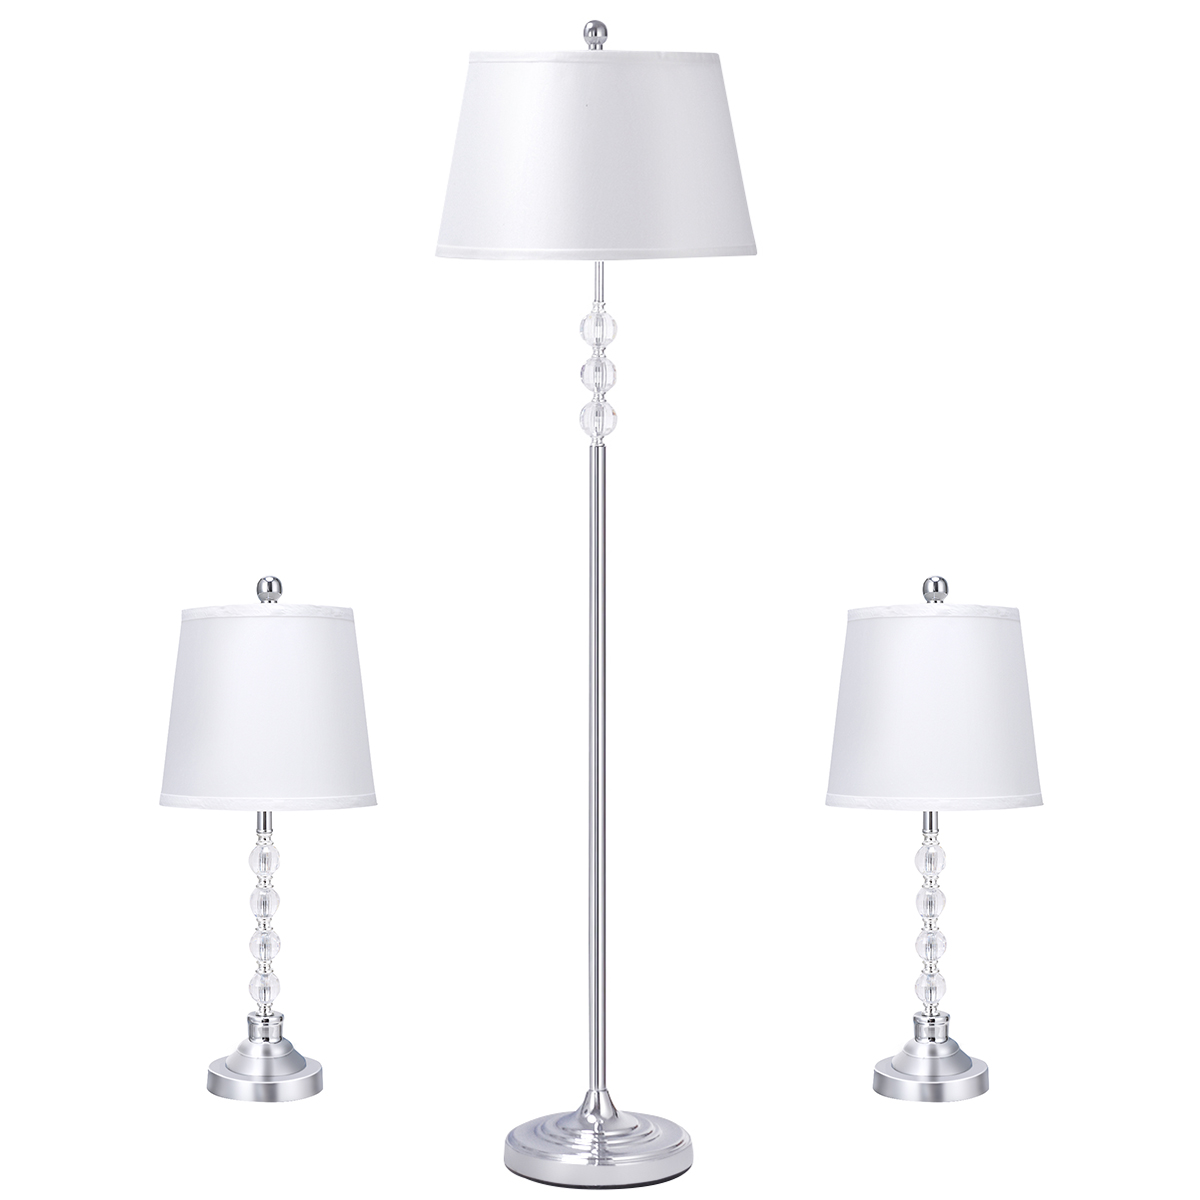 Gymax 3 Piece Lamp Set 2 Table Lamps 1, Modern Table Lamp Sets